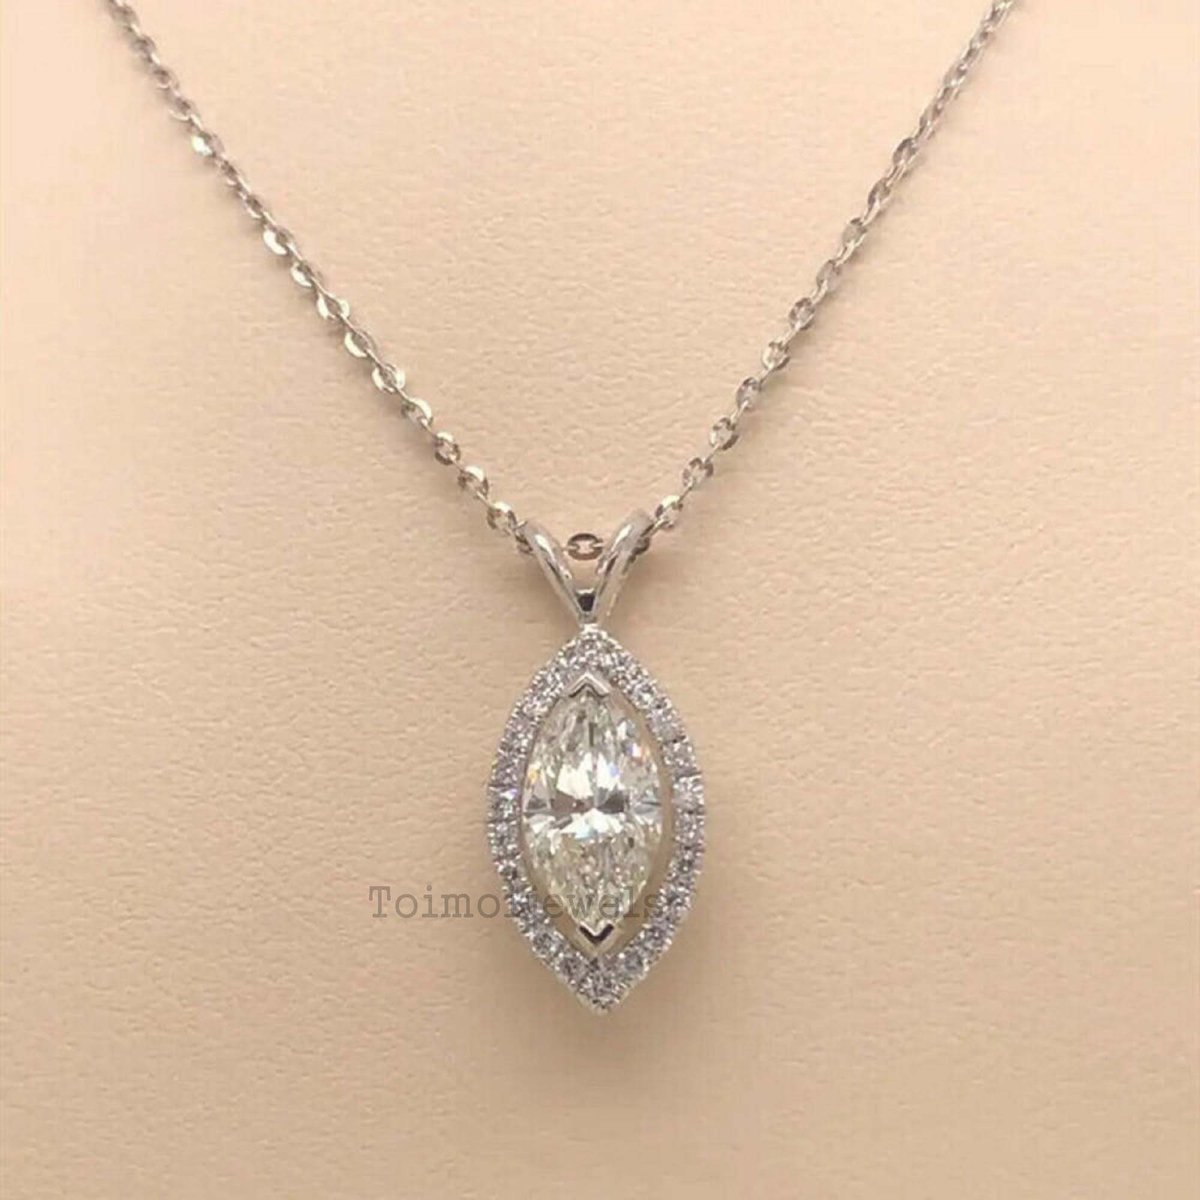 Excited to share the latest addition to my #etsy shop: Goregeous Moissanite Halo Pendant 2CT Marquise Cut Moissanite Pendant Dainty Pendanthttps://etsy.me/3NcpQ2y #moissanitependant #pendantnecklace #diamondnecklace #diamondpendant #uniquependant #marquisependant